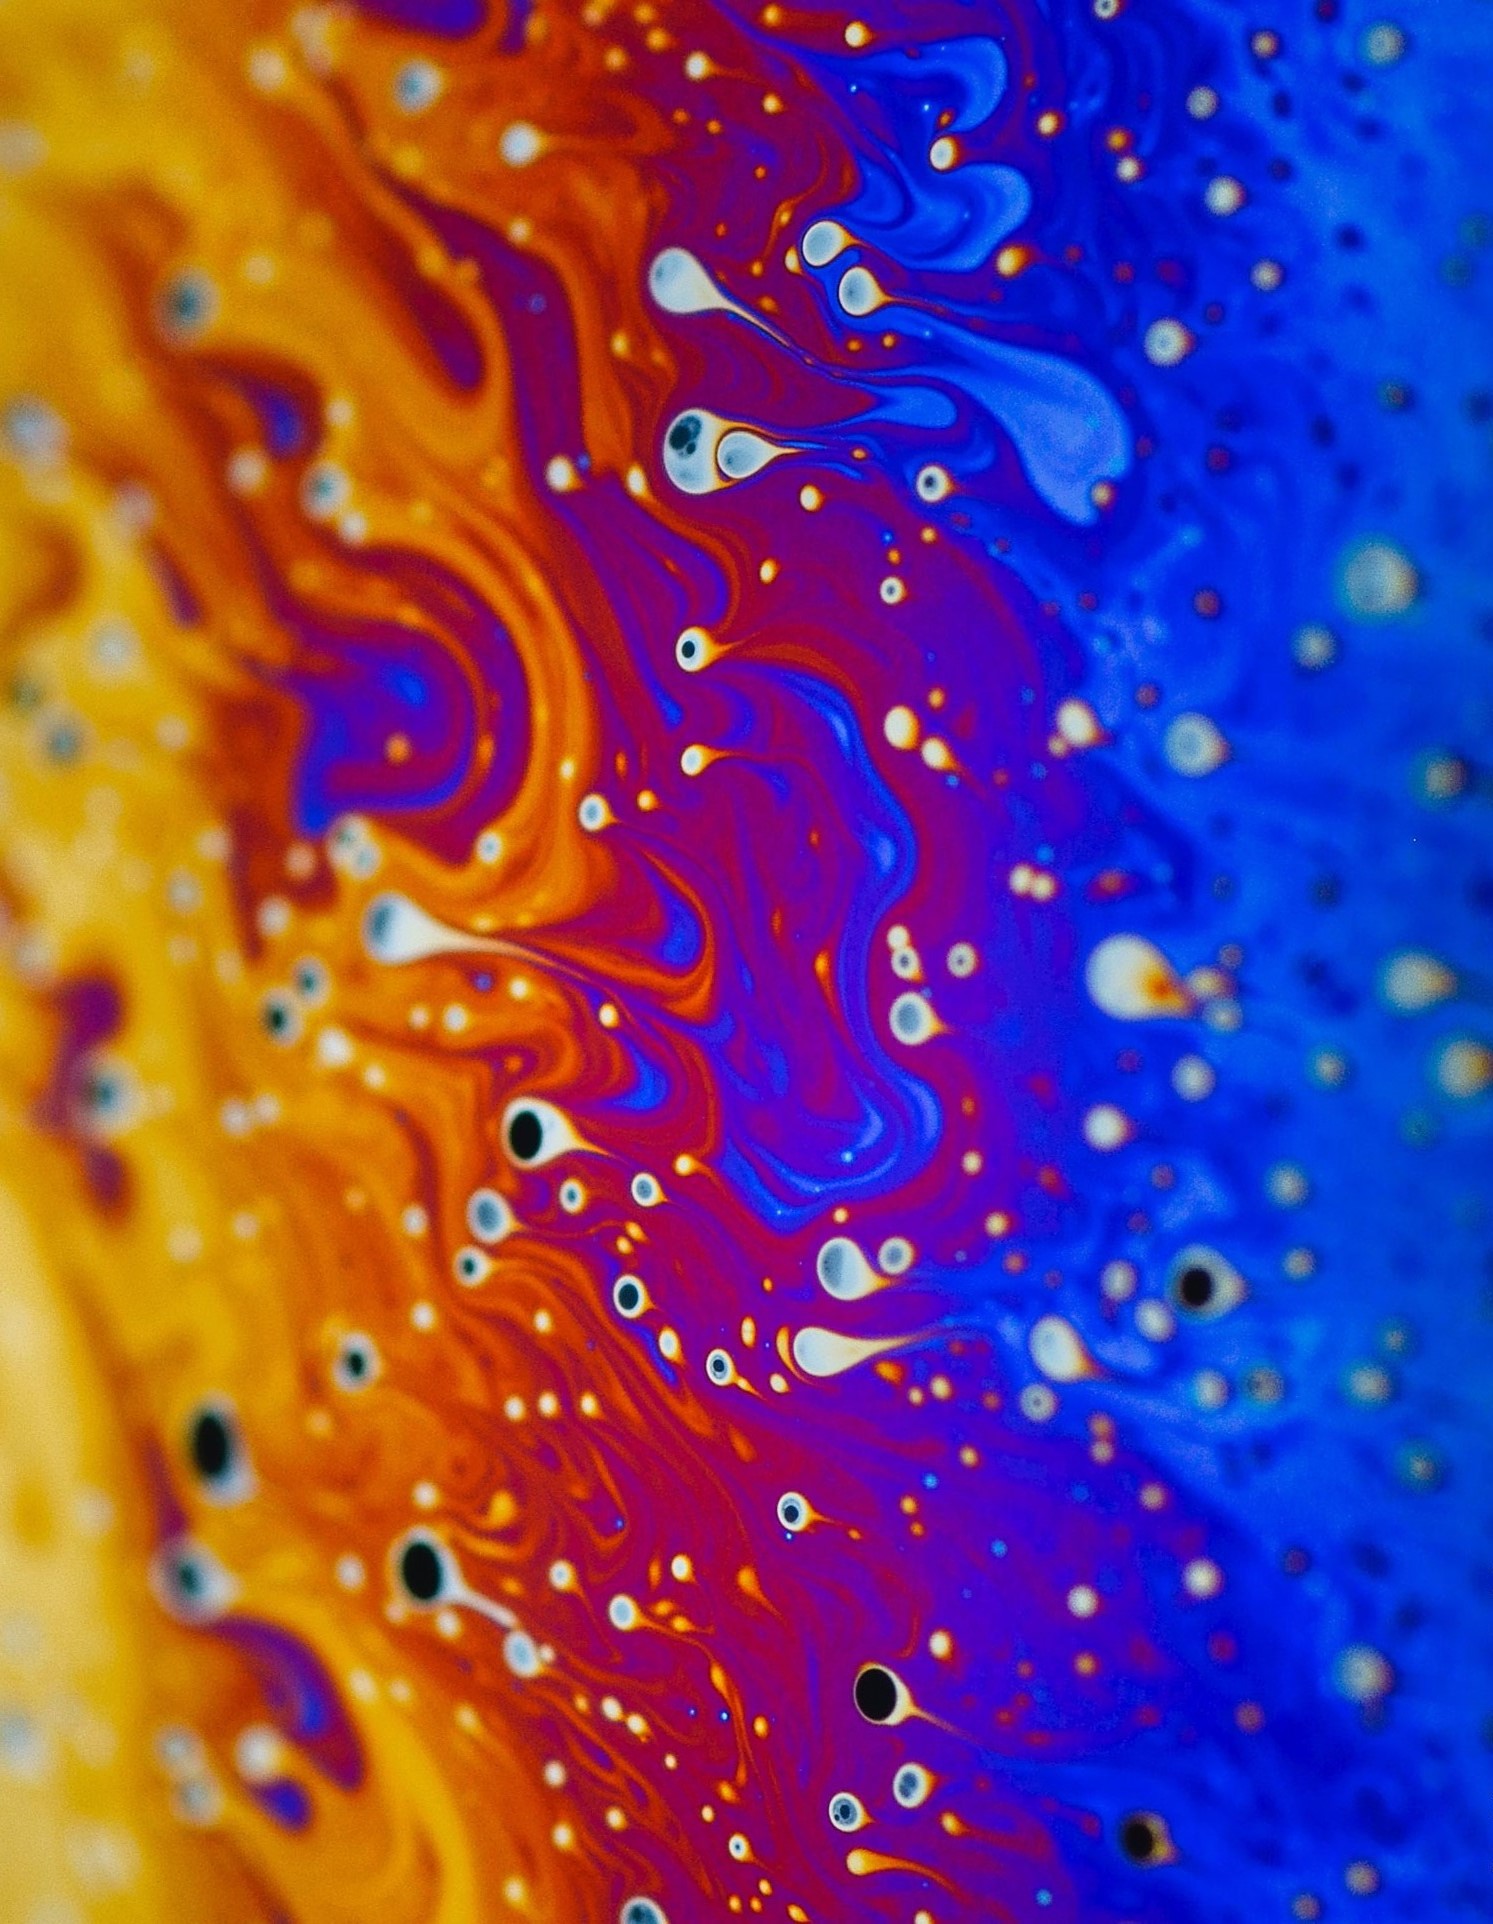 The image shows a mixture of water and soap. By illuminating the bubbles, electric shapes and colours are created. The waves of blue, orange and pink stand out.